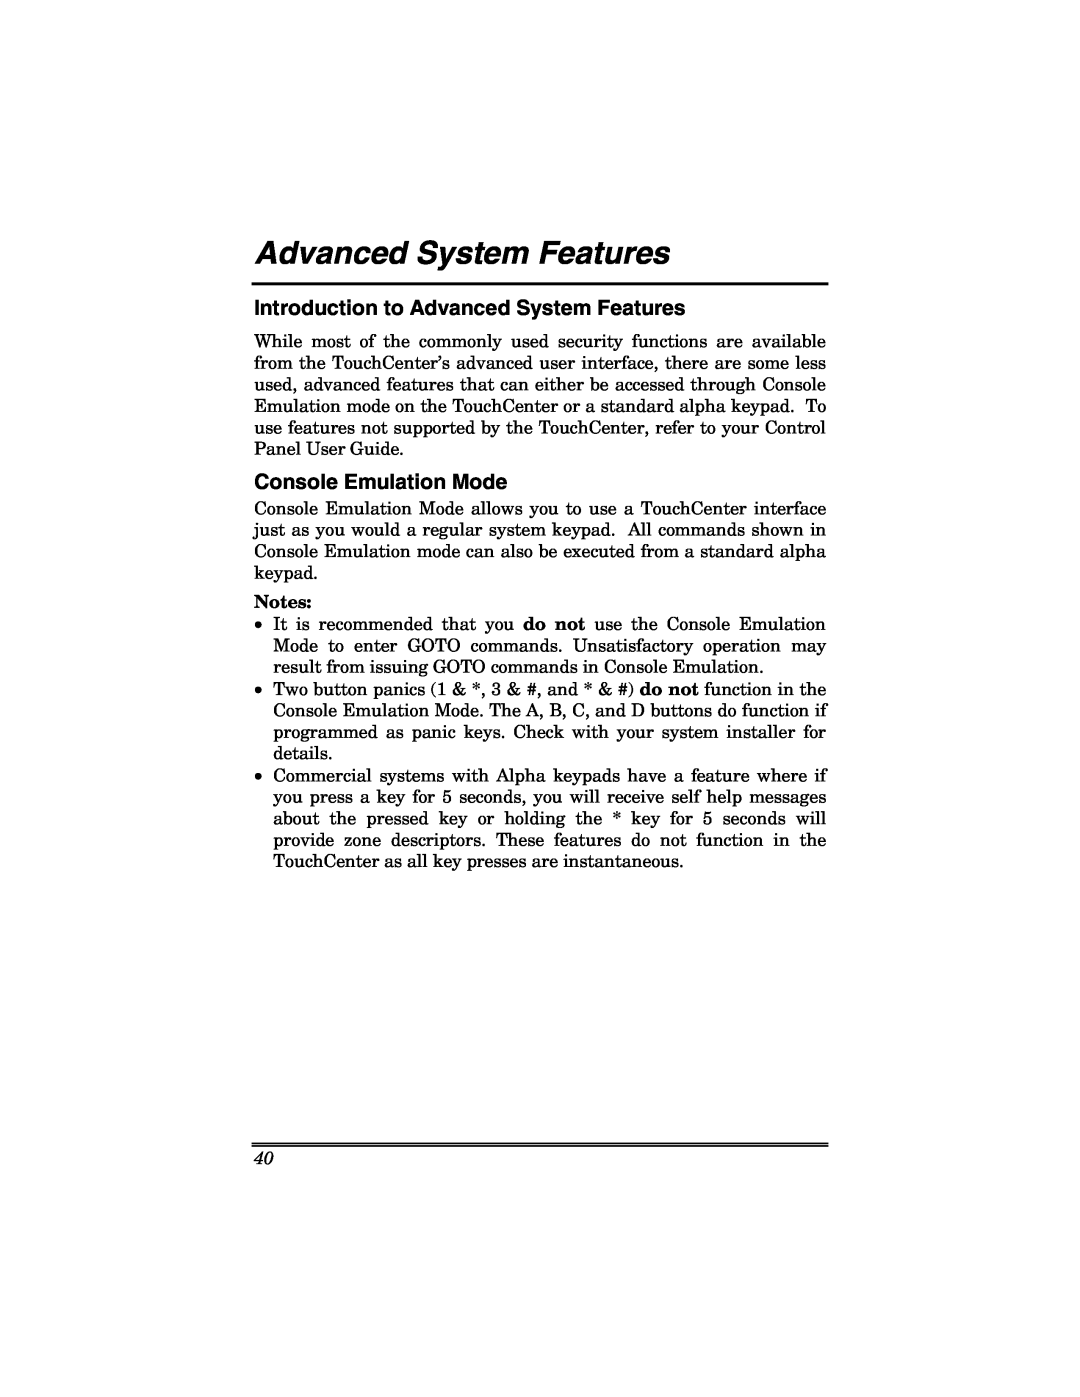 Honeywell 6271 manual Introduction to Advanced System Features, Console Emulation Mode 